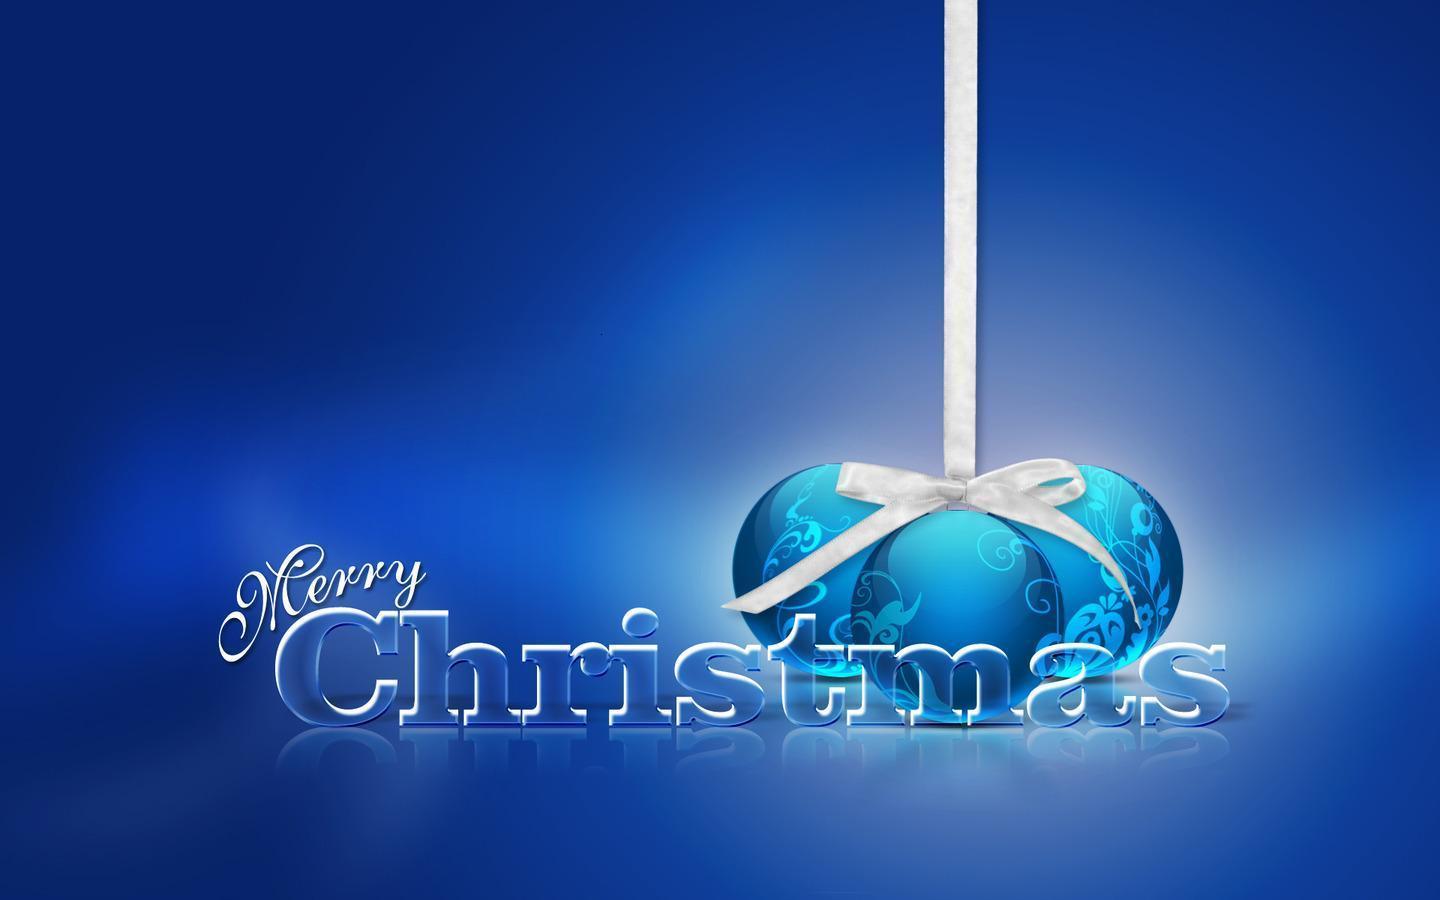 Xmas Stuff For > 3D Christmas Wallpaper Background